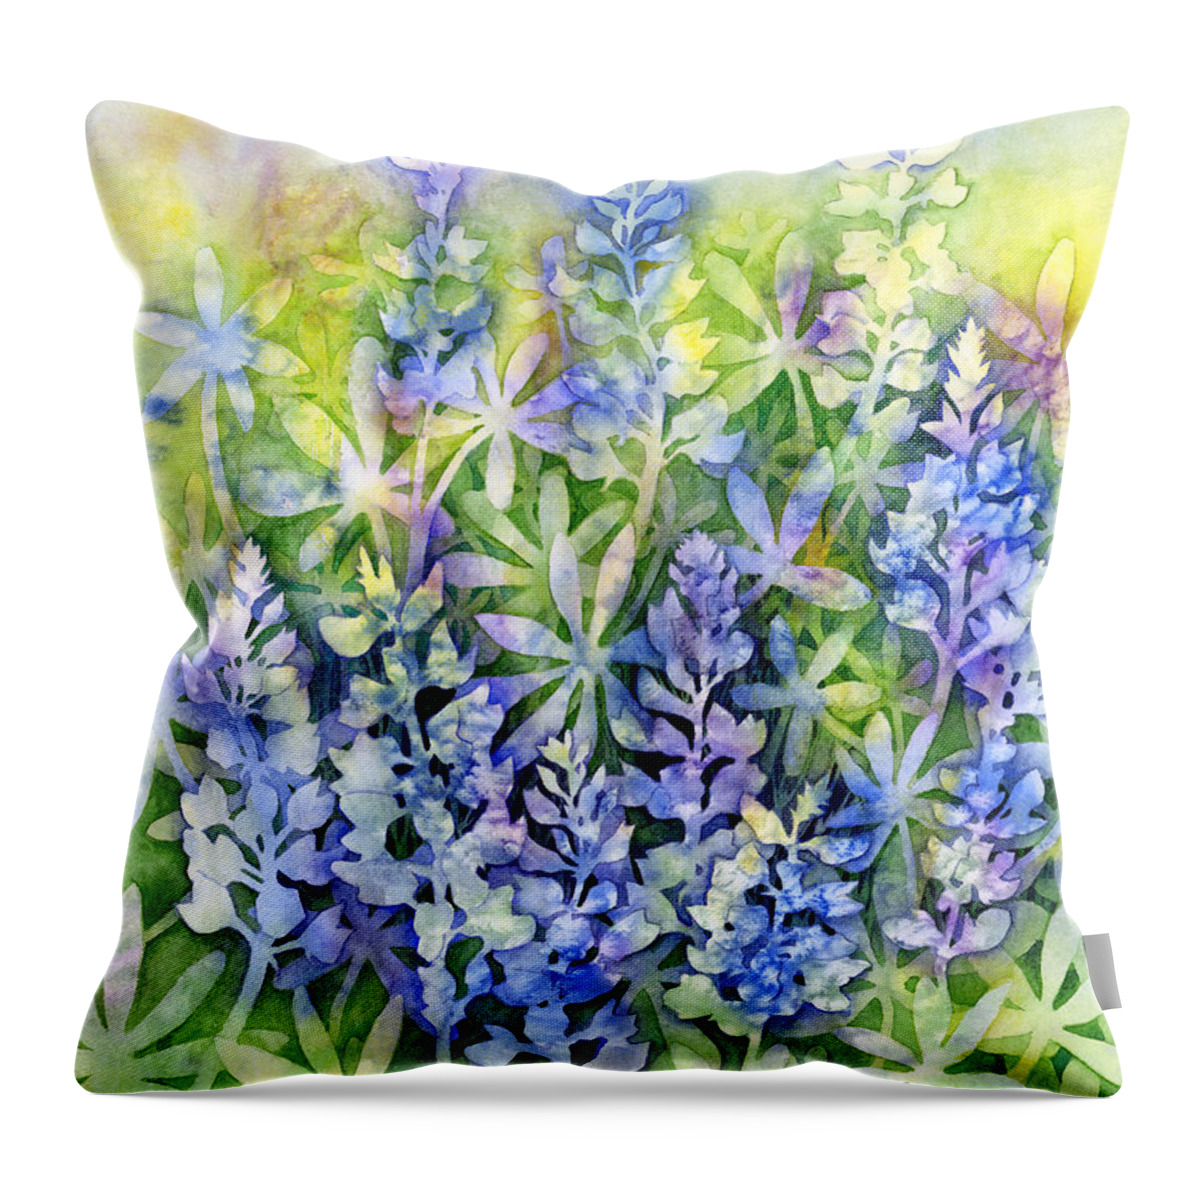 Texas Throw Pillow featuring the painting Texas Blues by Hailey E Herrera